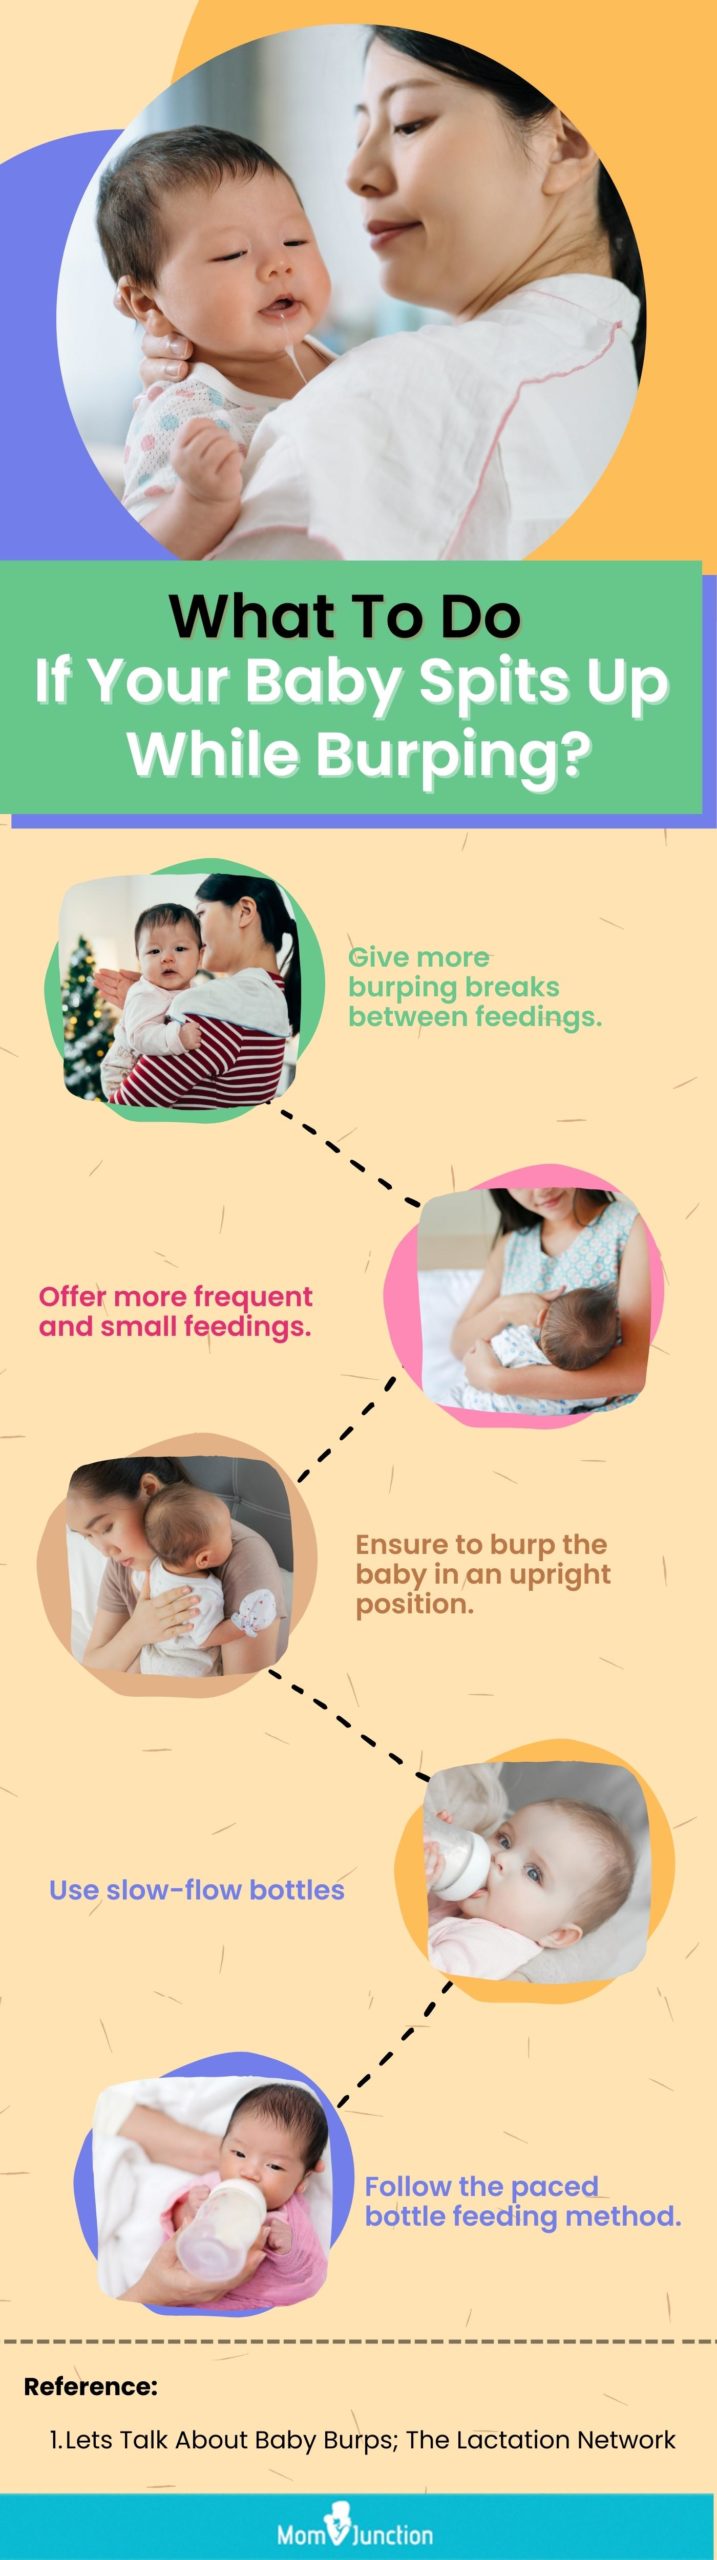 what to do if your baby spits up while burping (infographic)